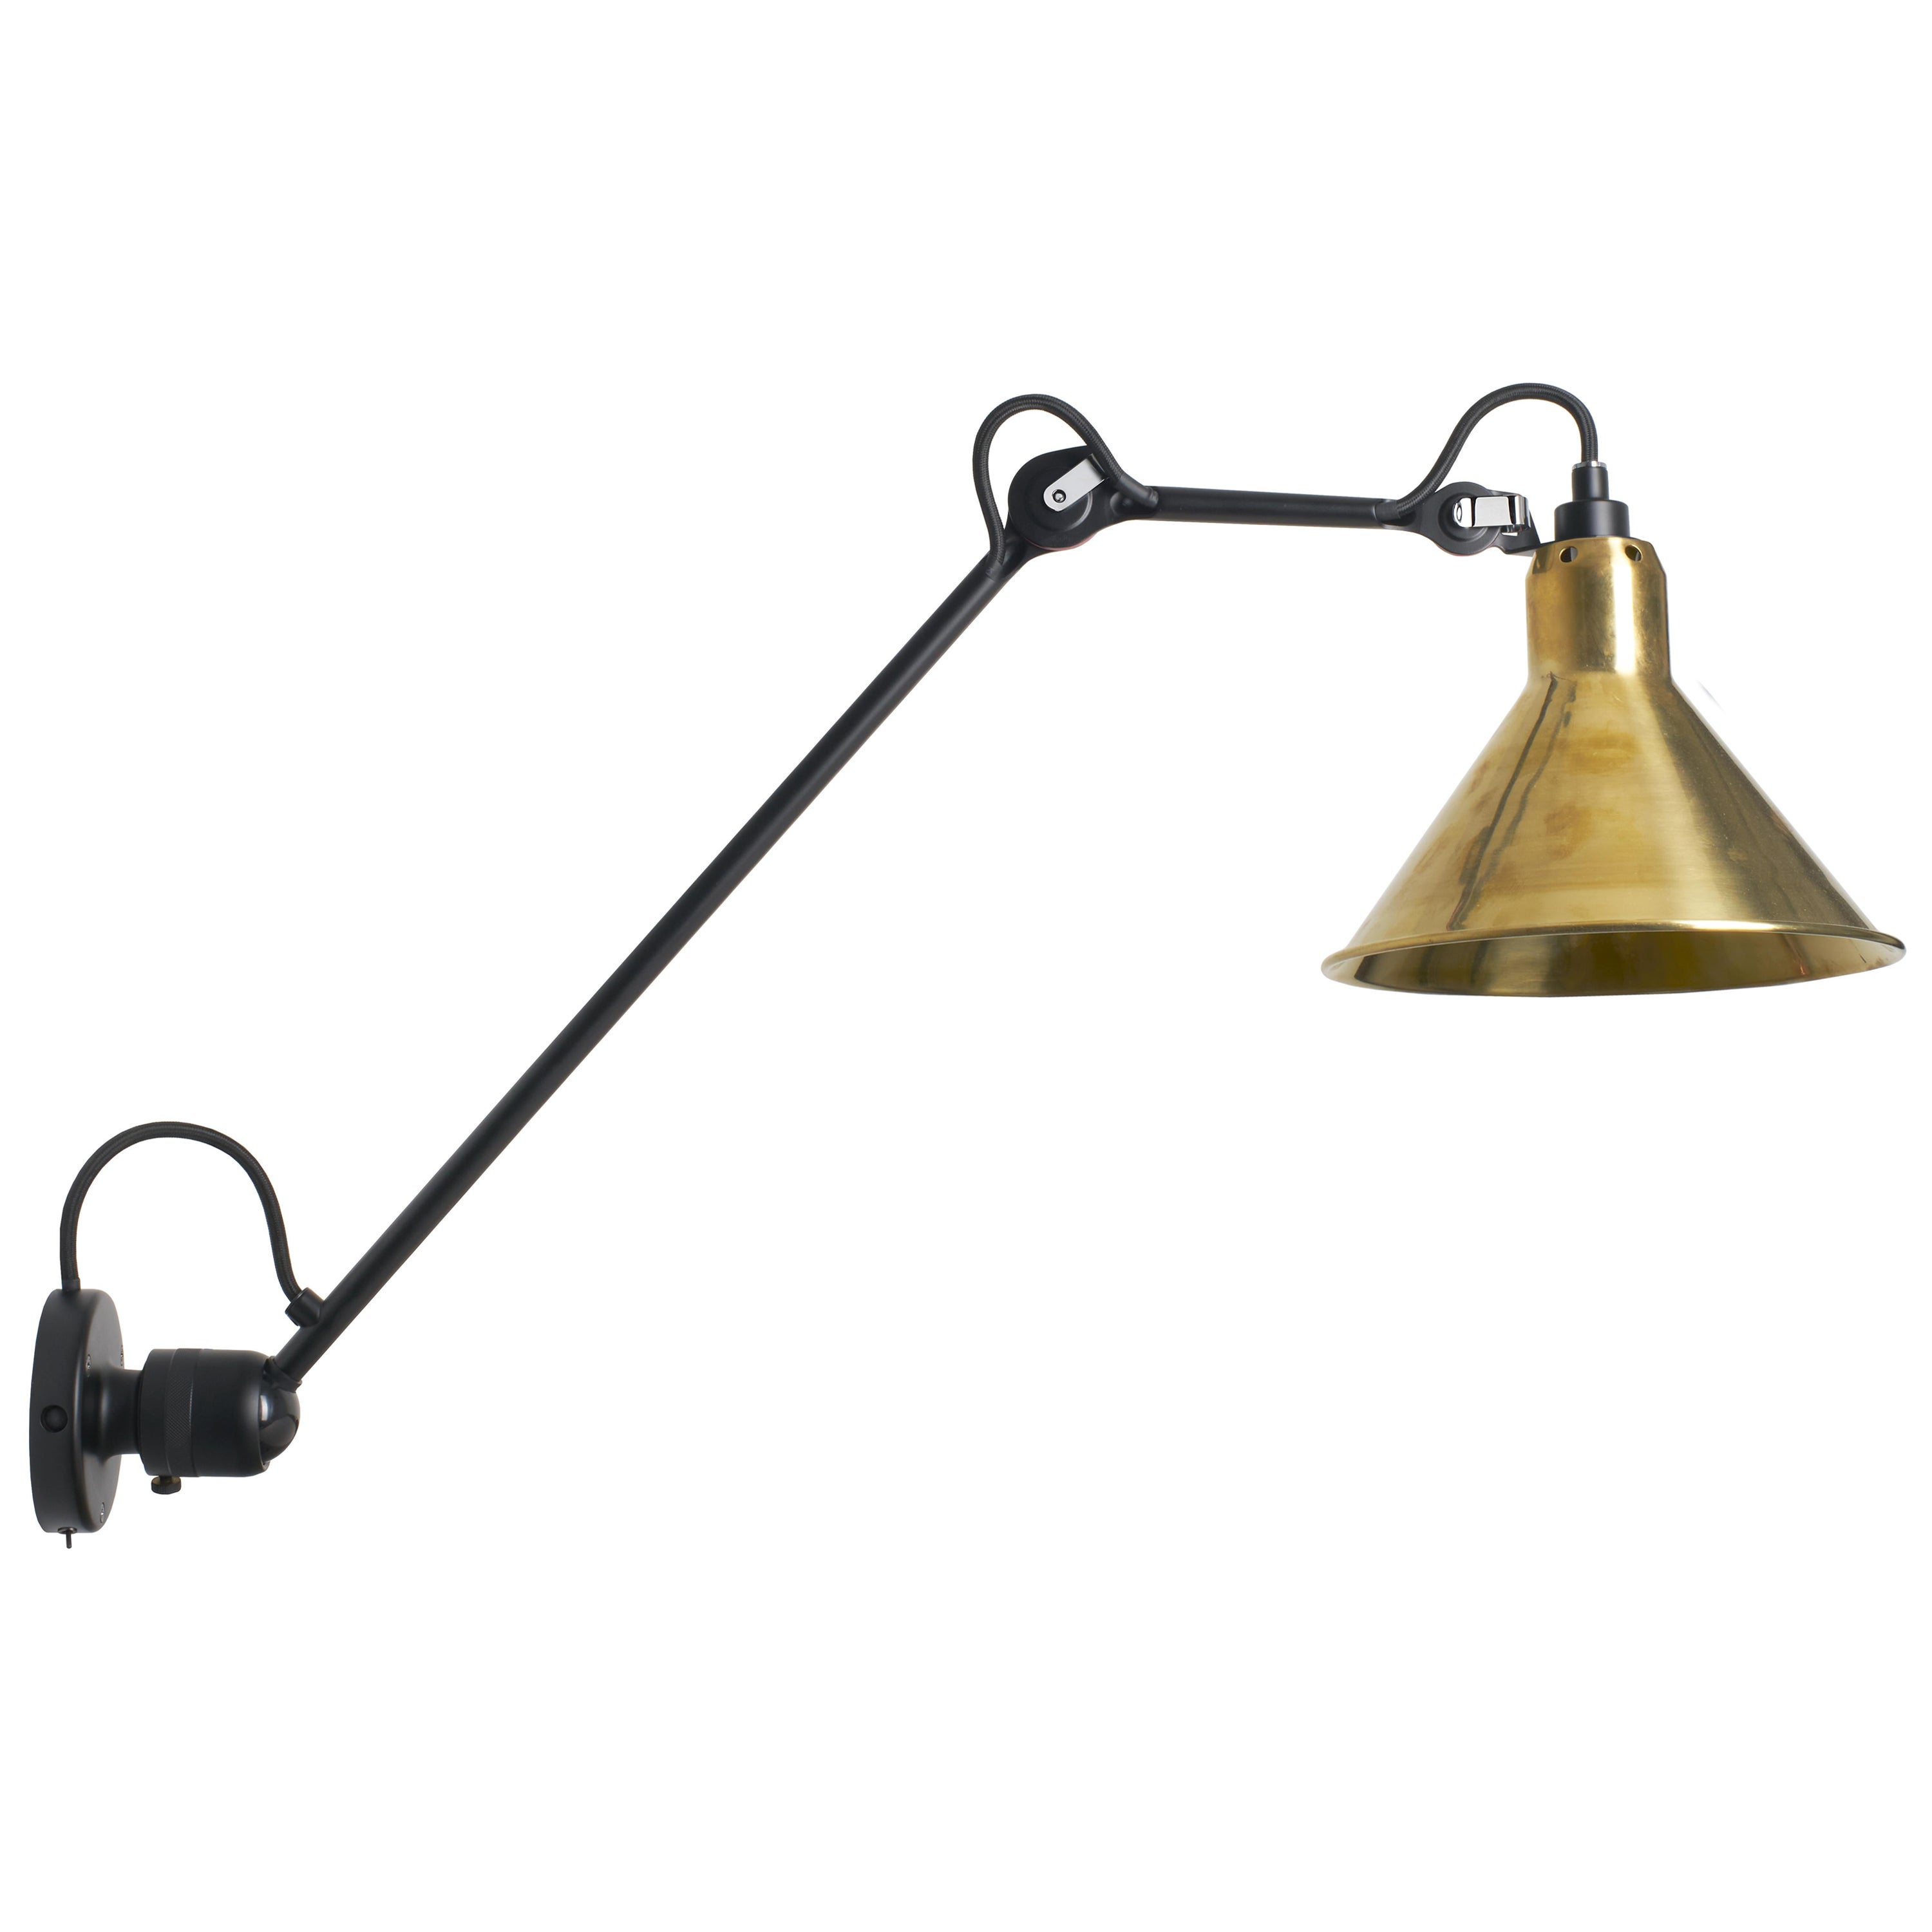 DCW Editions La Lampe Gras N°304 L40 SW Conic Wall Lamp in Brass Shade For Sale